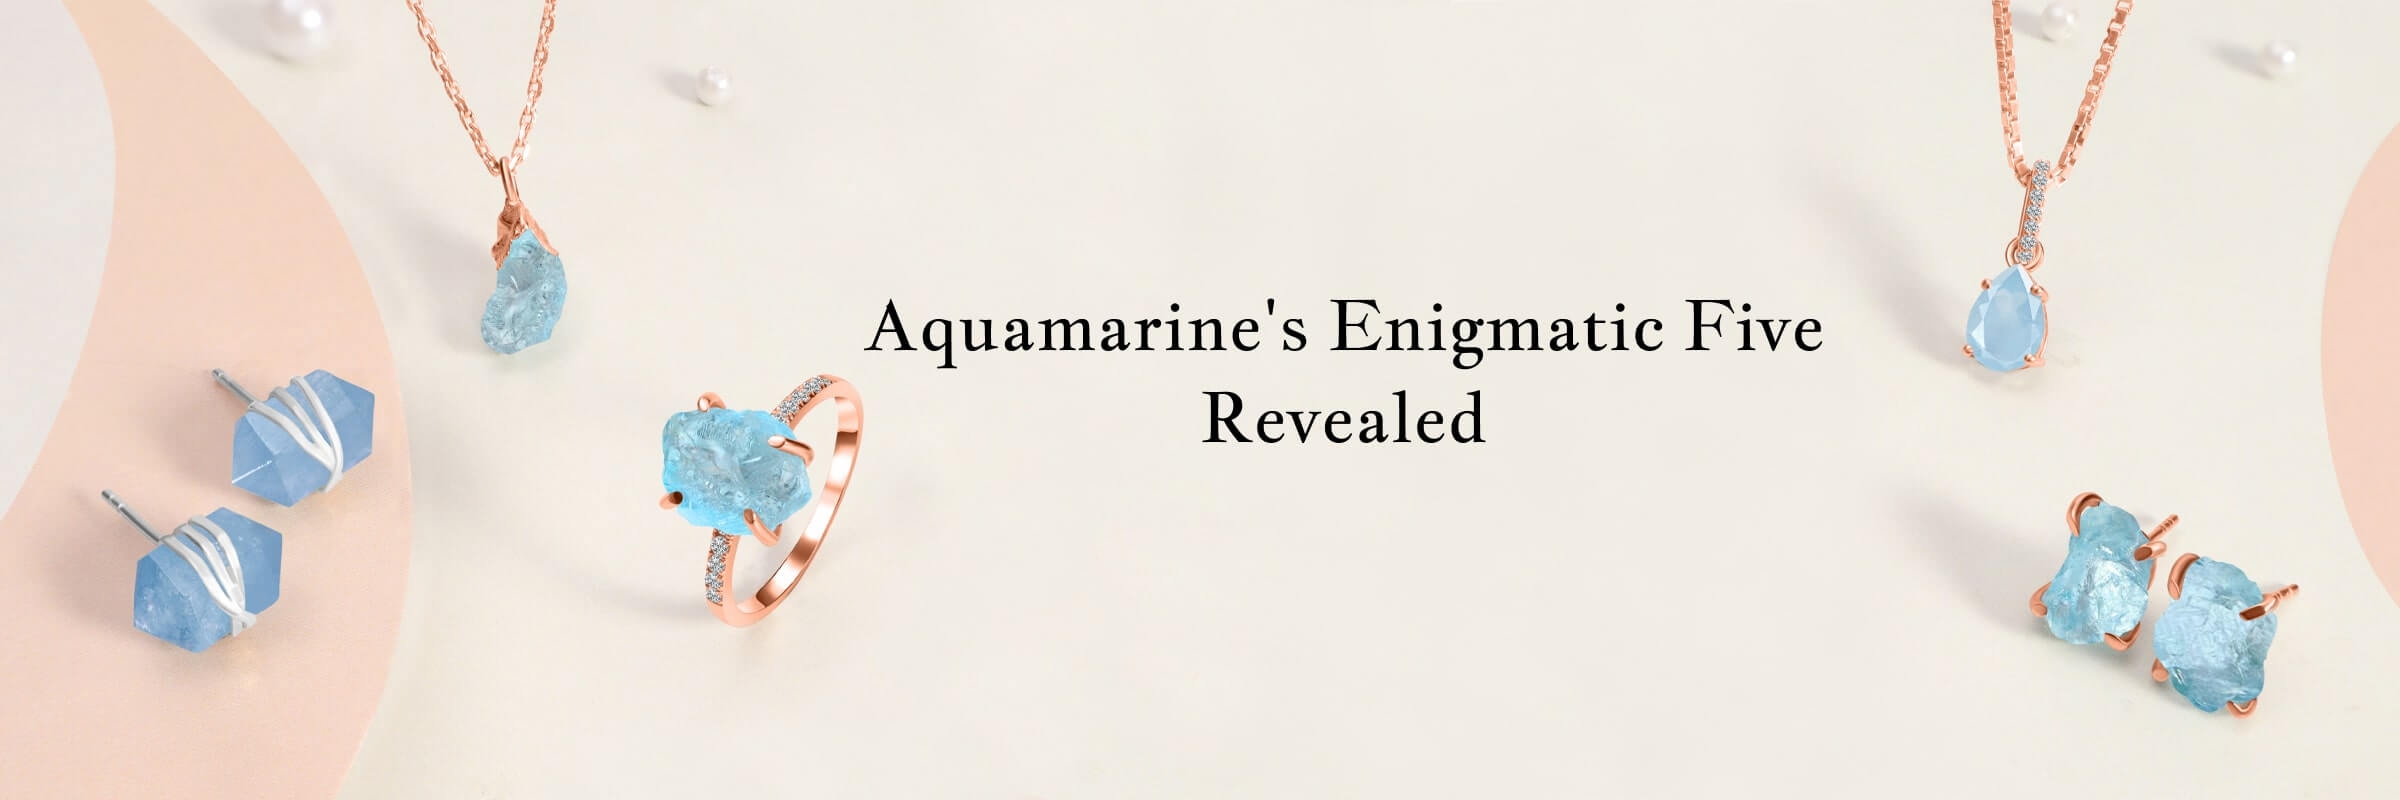 Five facts about Aquamarine